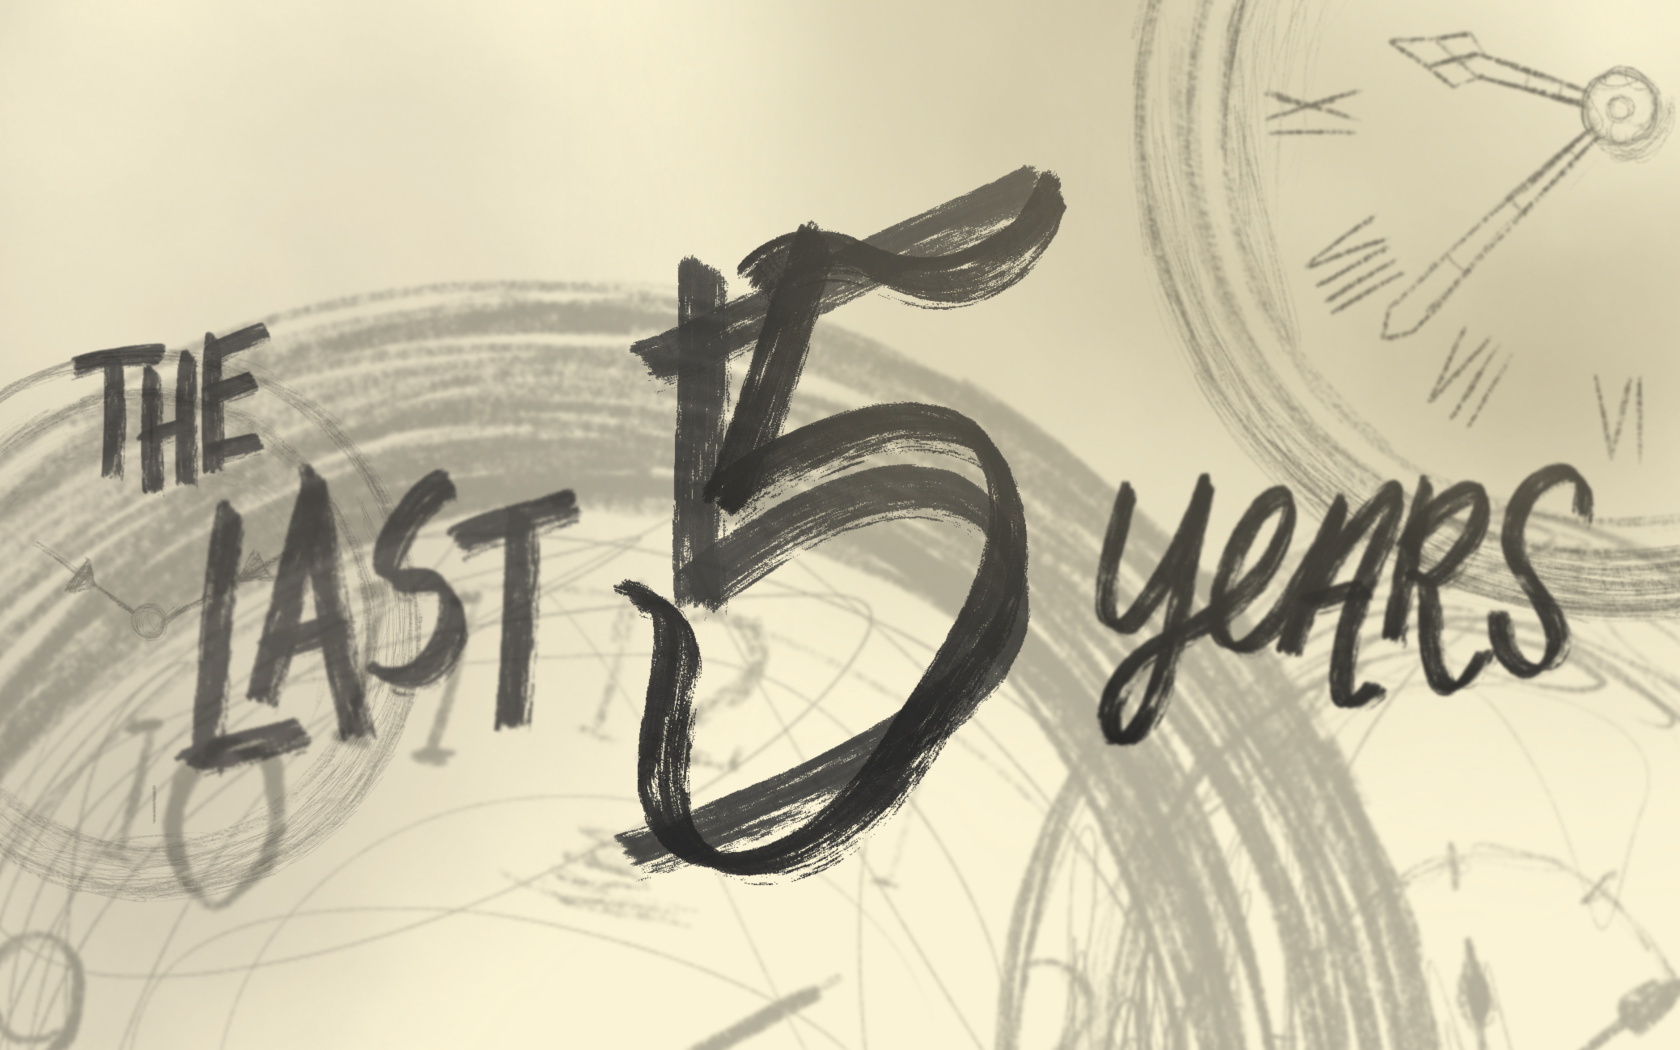 The Last 5 Years in graphic pencil over clock sketches